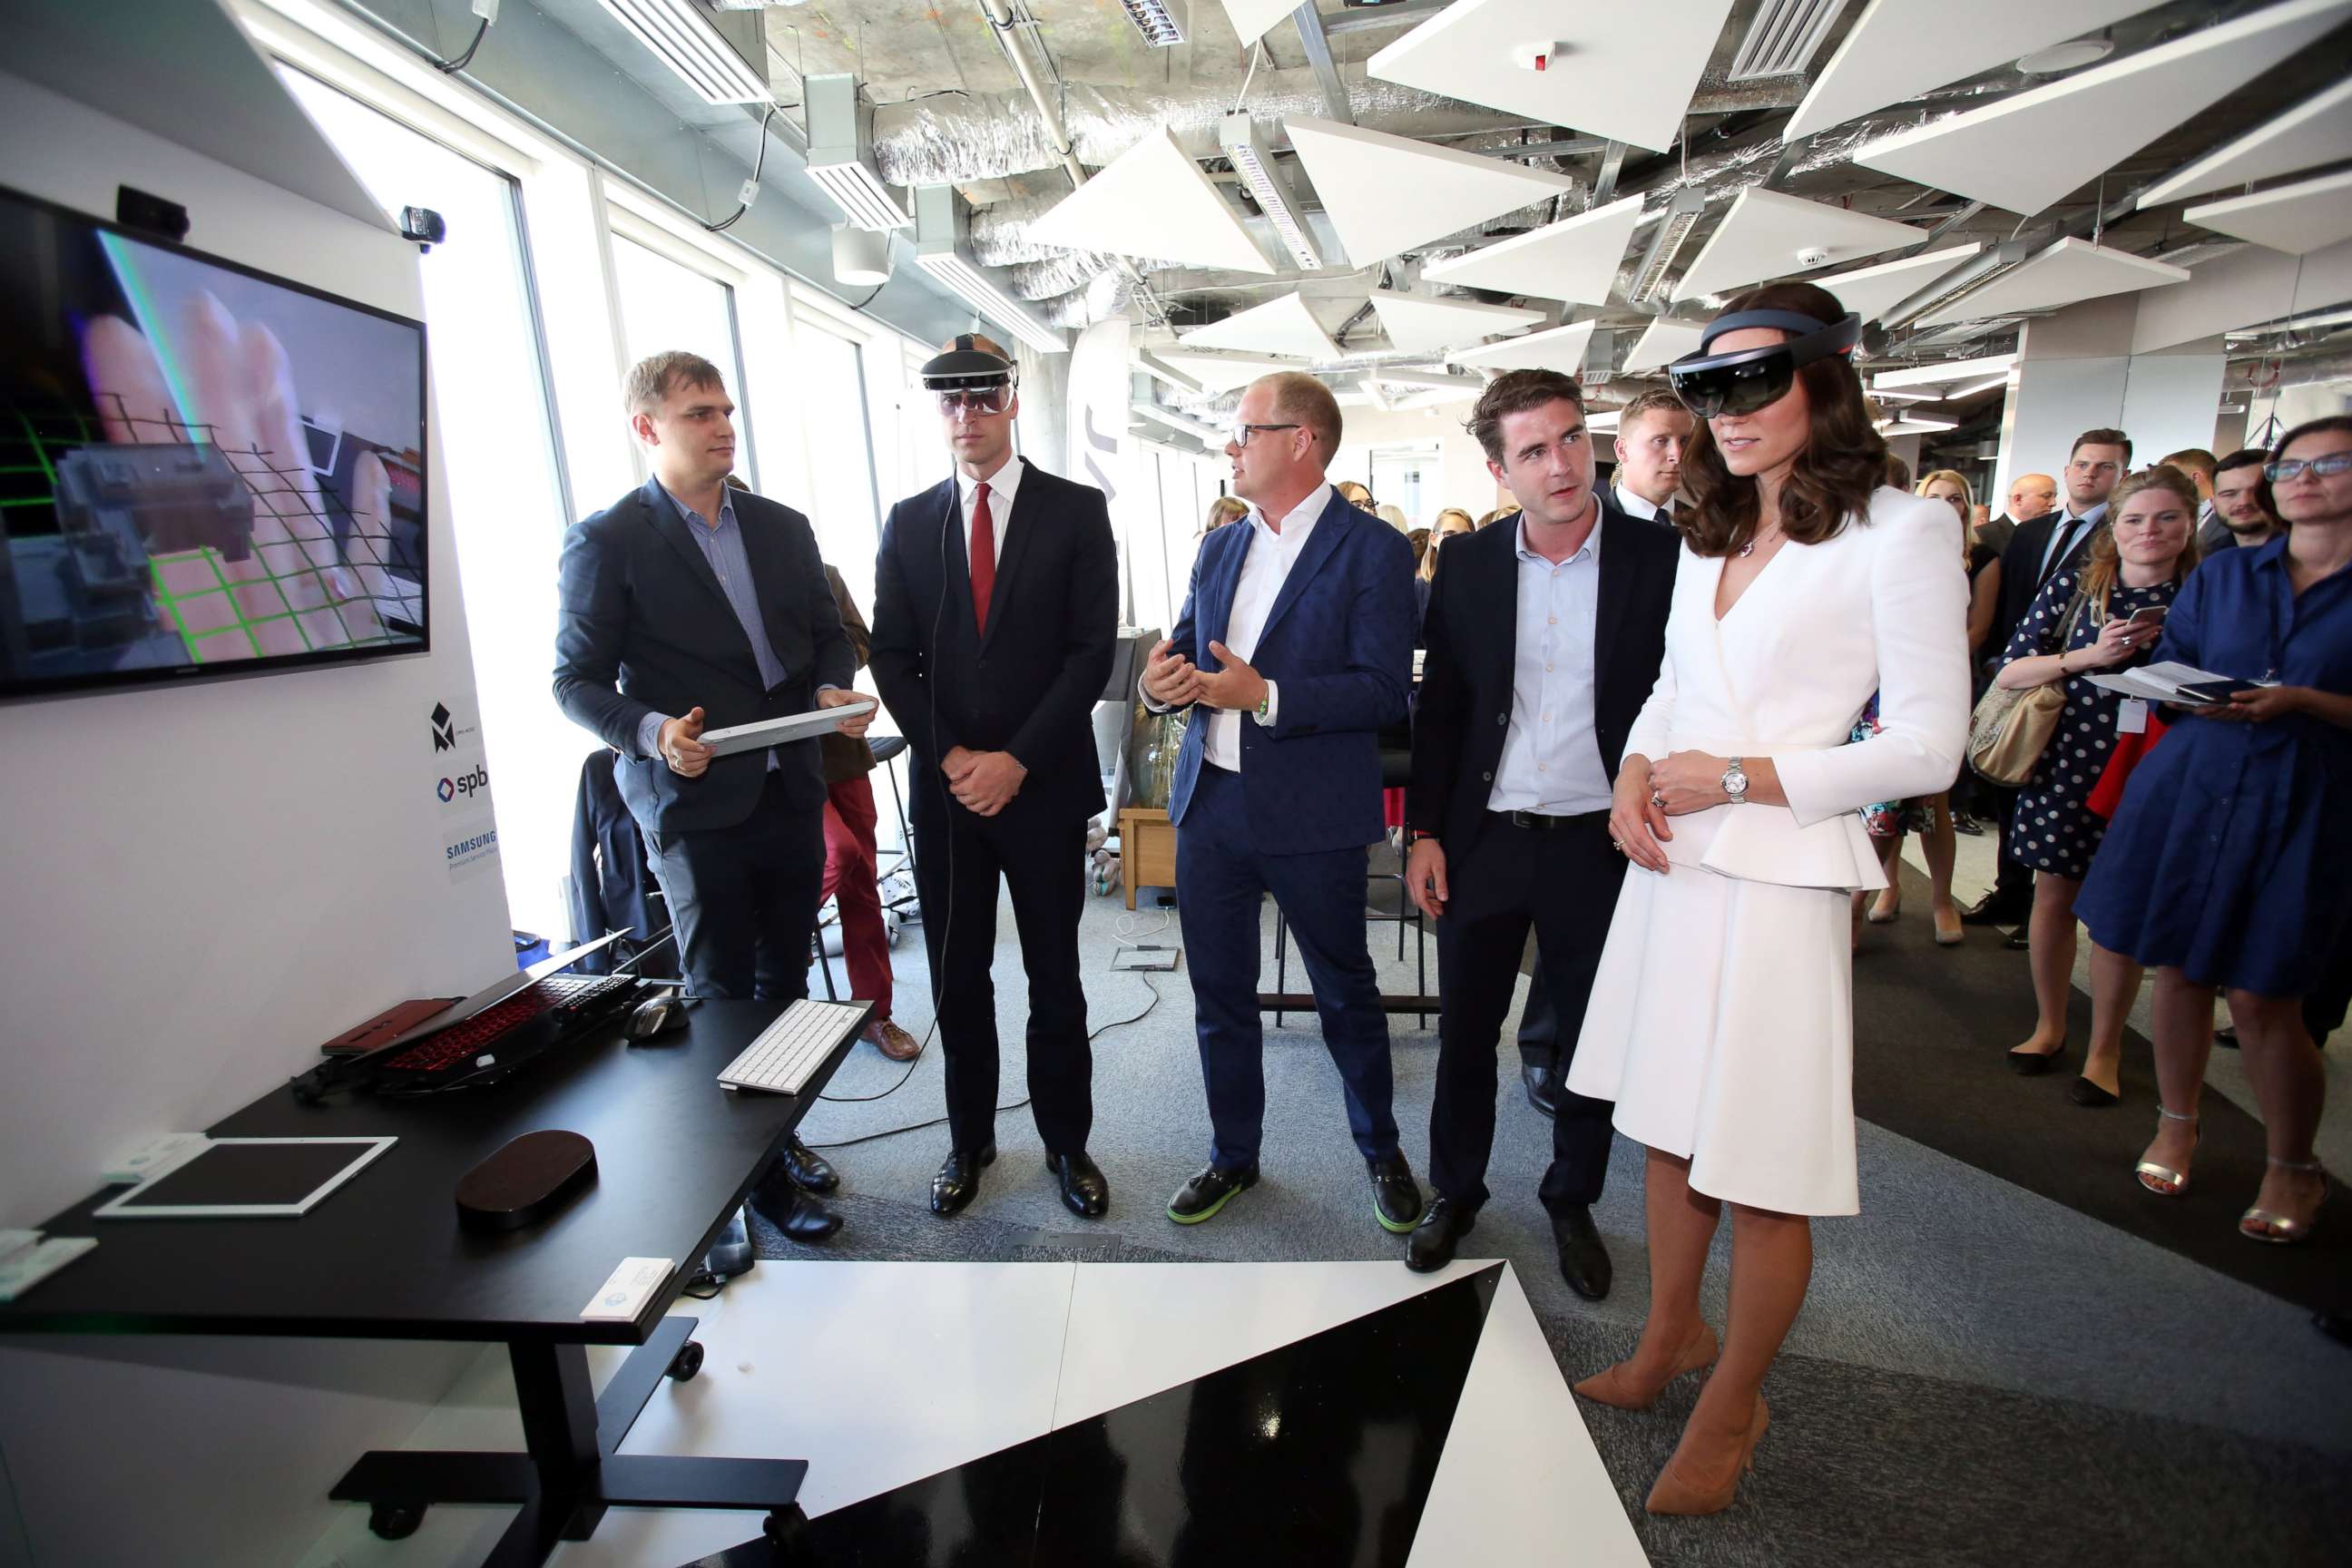 PHOTO: Britain's Prince William and Duchess Catherine look through a virtual reality goggles as they meet with young Polish entrepreneurs at the Heart business incubator in the Warsaw Spire building in Warsaw, Poland, July 17, 2017.